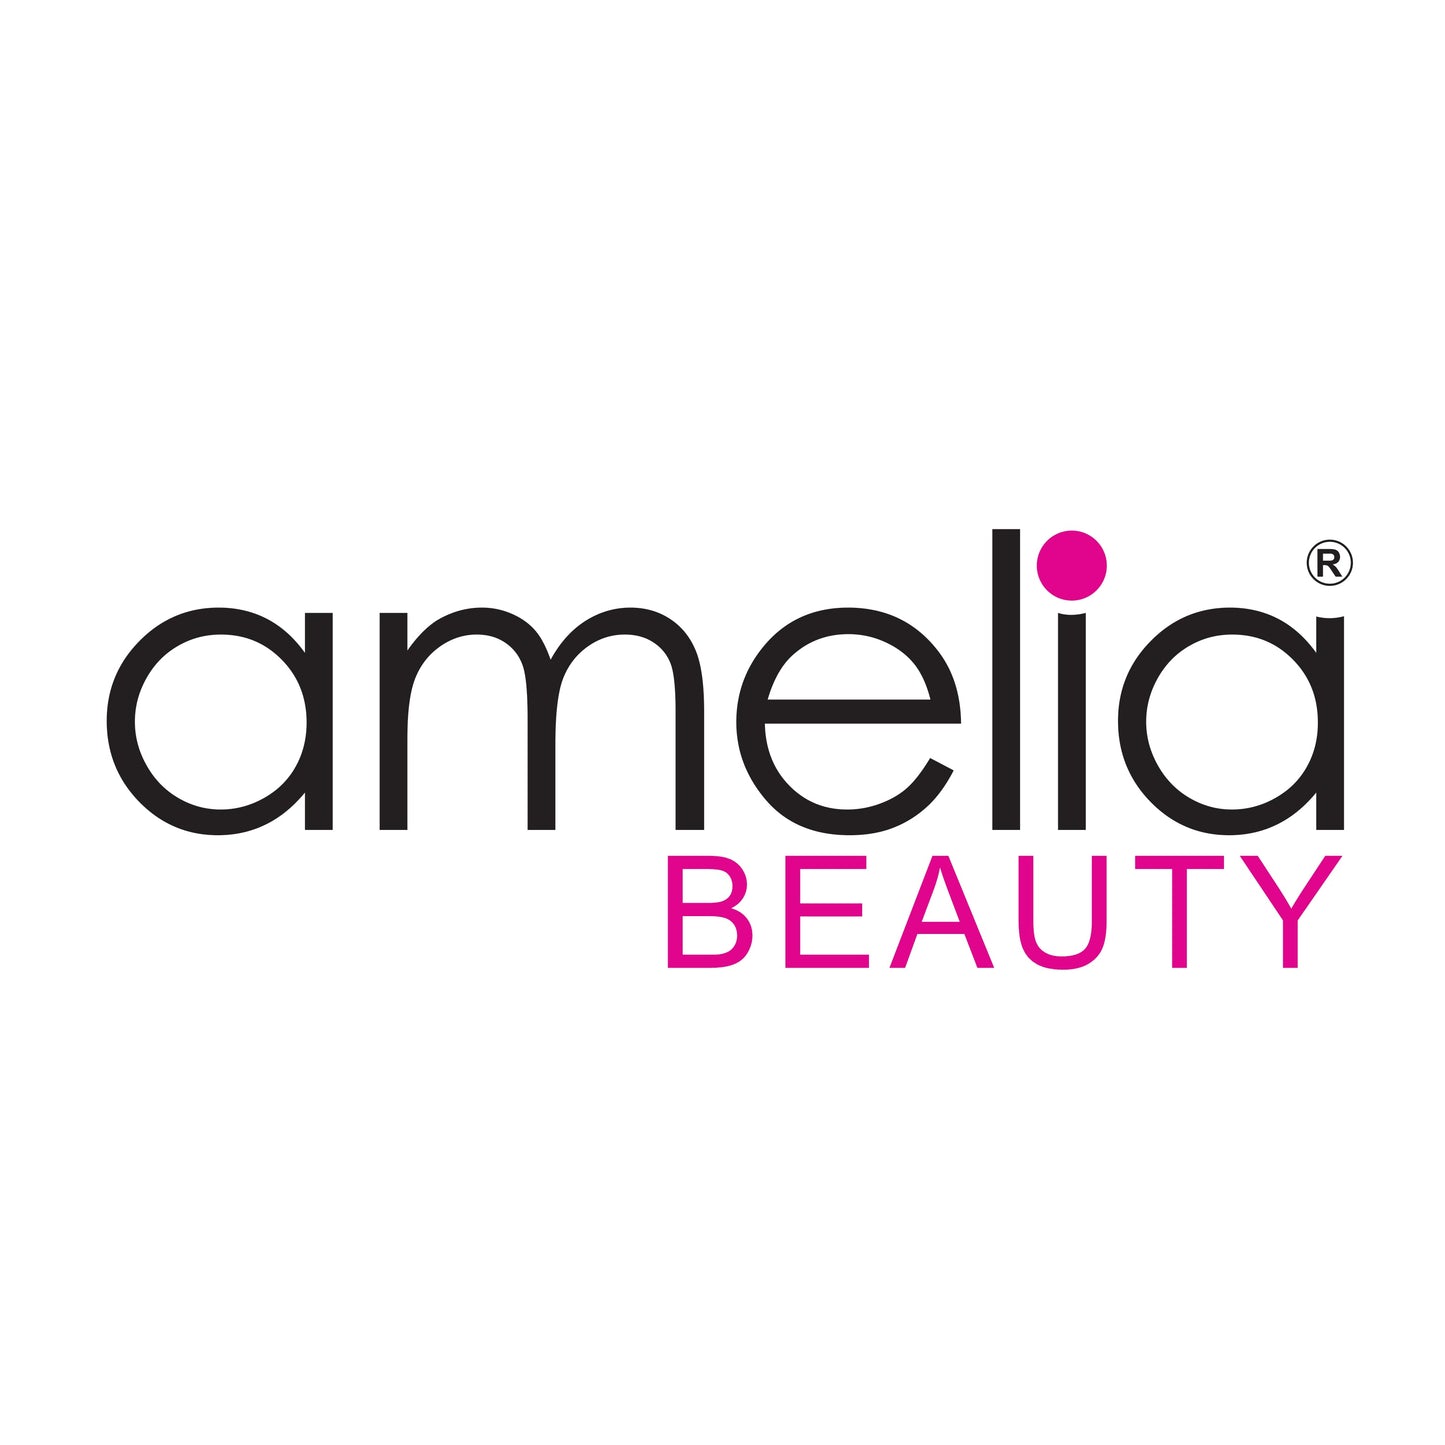 Amelia Beauty Products 8 Medium Smooth Elastic Hair Coils, 2.25in Diameter Spiral Hair Ties, Gentle on Hair, Strong Hold and Minimizes Dents and Creases, Olive